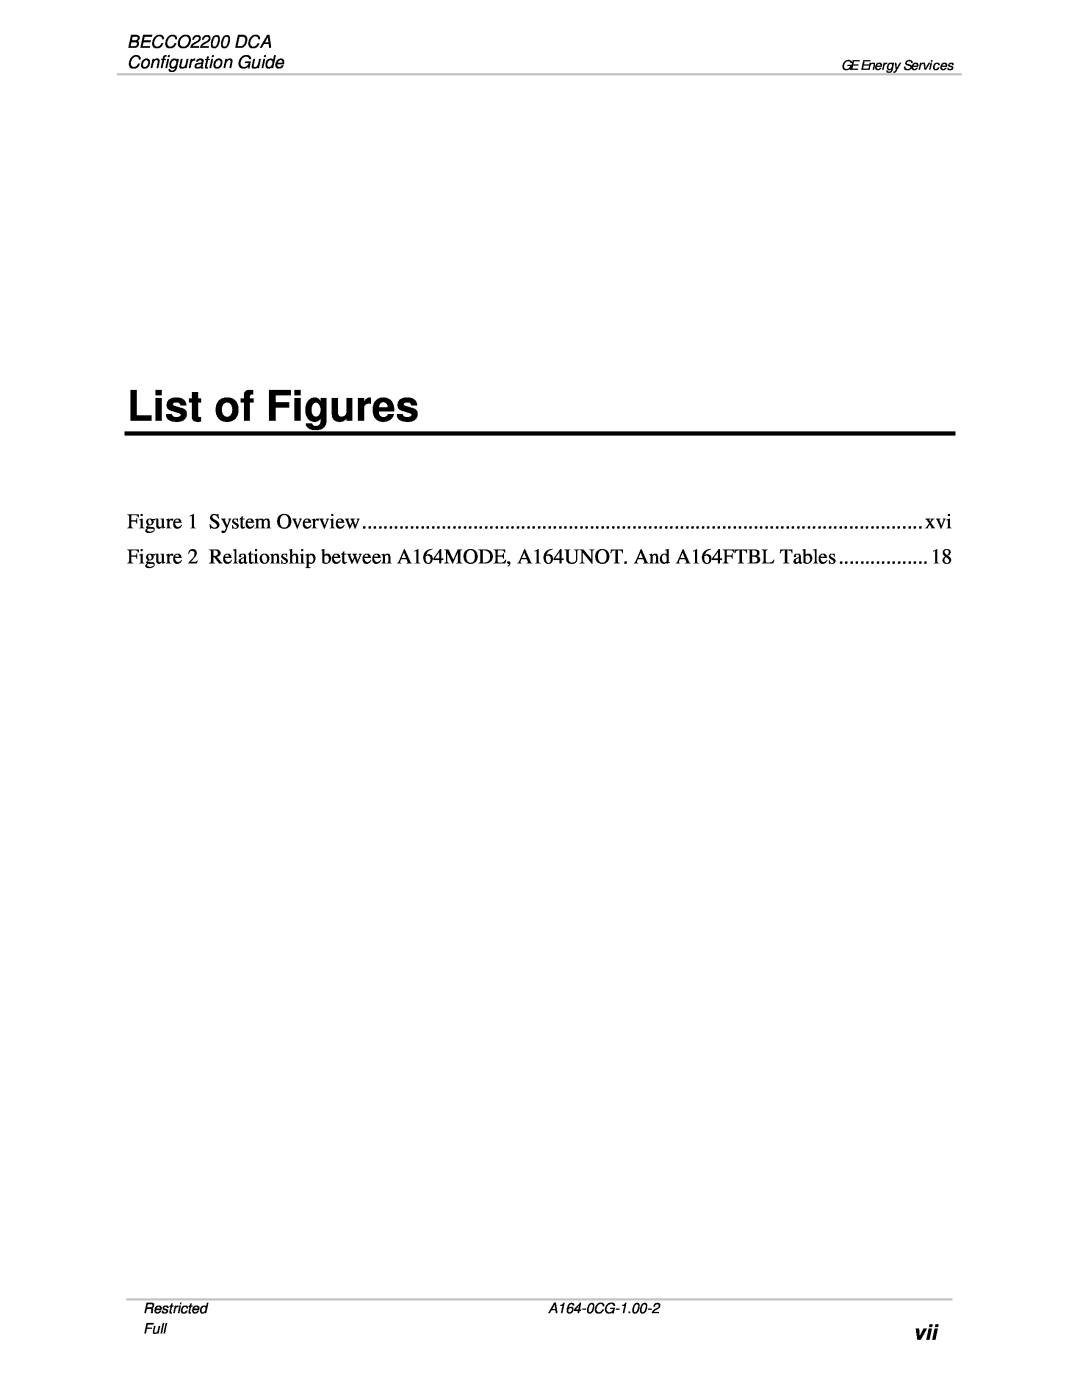 GE manual List of Figures, BECCO2200 DCA, Configuration Guide, Restricted, Full, A164-0CG-1.00-2, GE Energy Services 